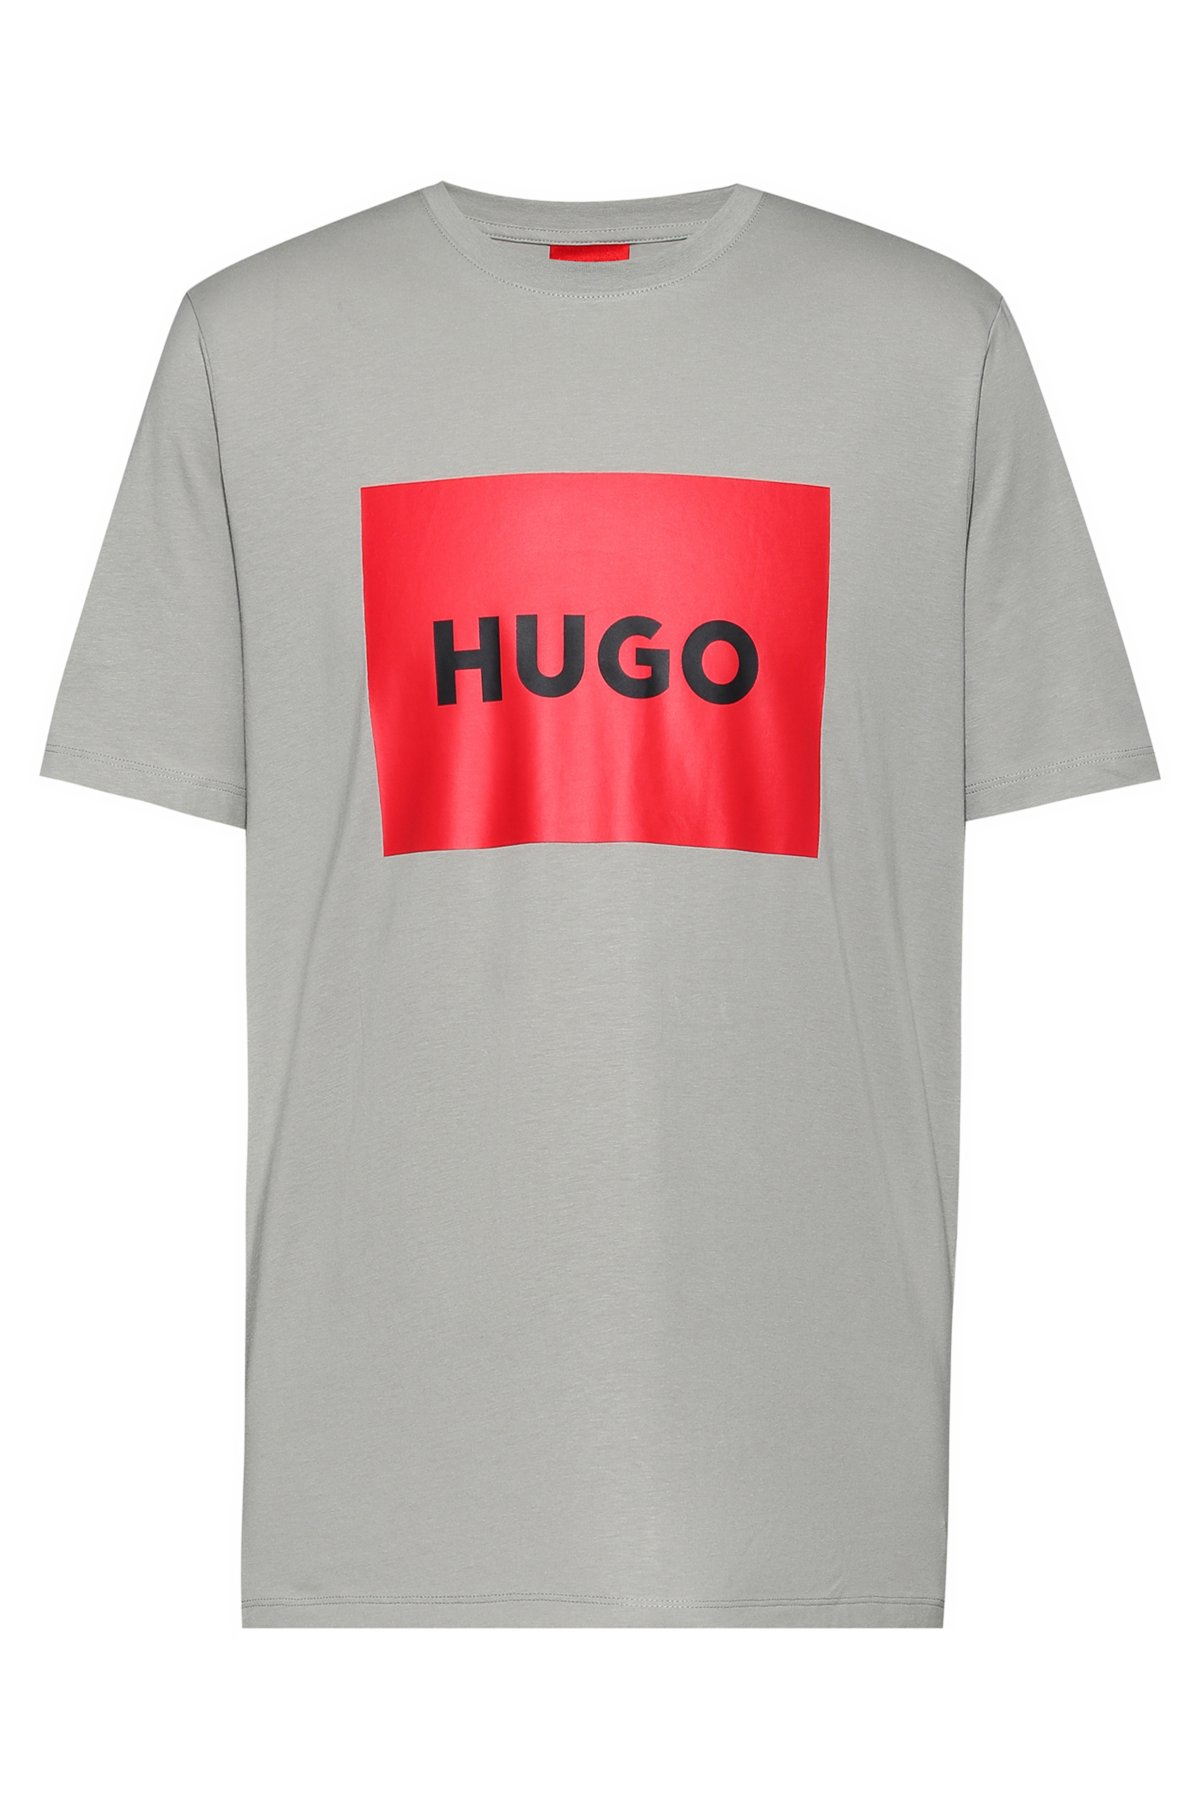 Crew-neck T-shirt in cotton jersey with box logo, Grey